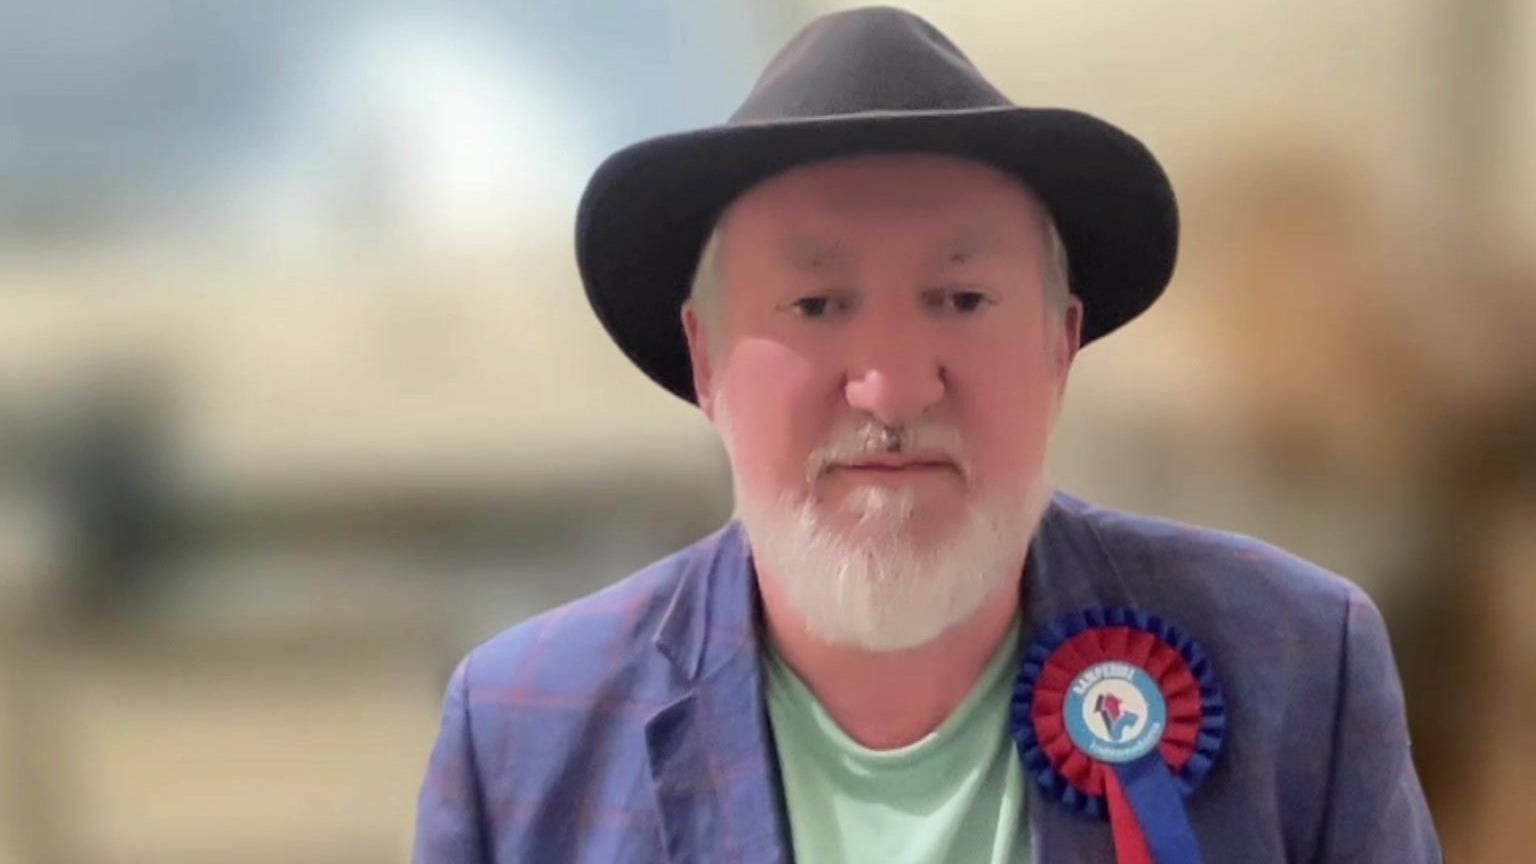 Alan Stone wearing a dark trilby hat and a blue blazer with a red and blue rosette on the lapel